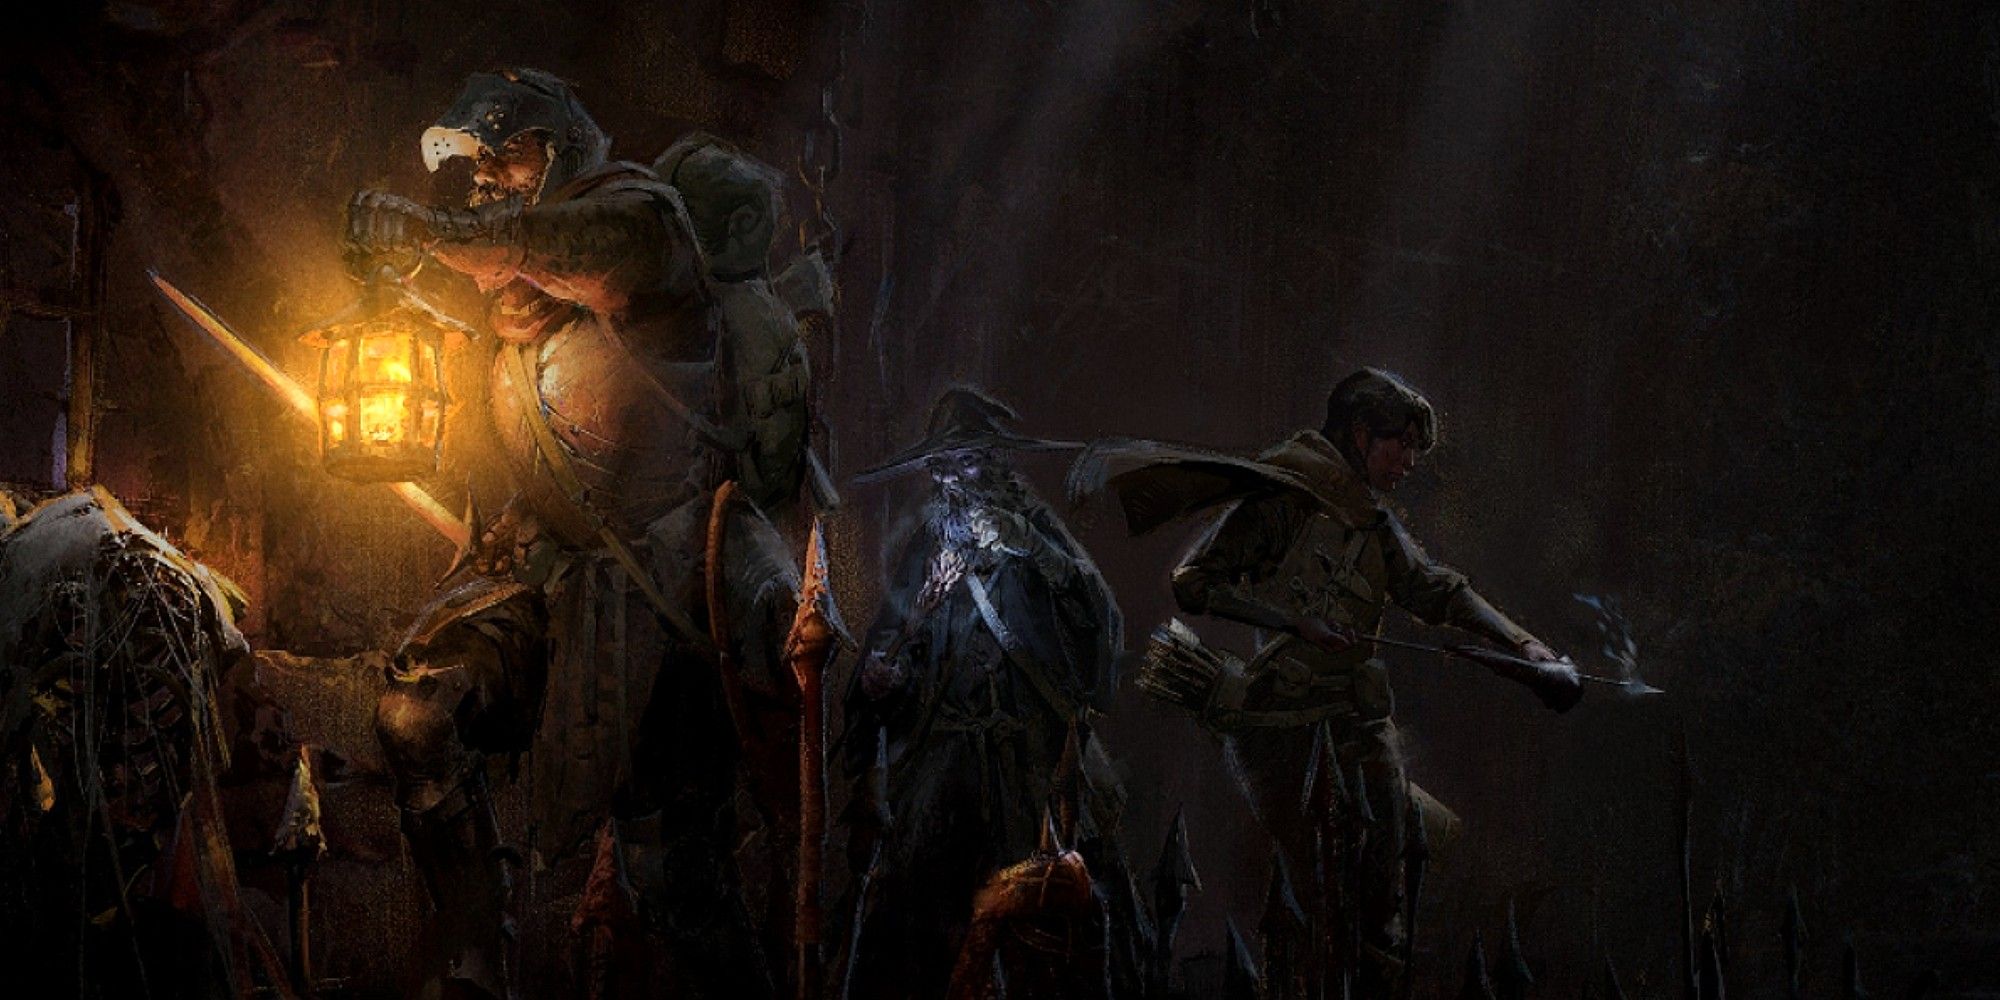 Dark And Darker Party of adventurers with weapons and lantern